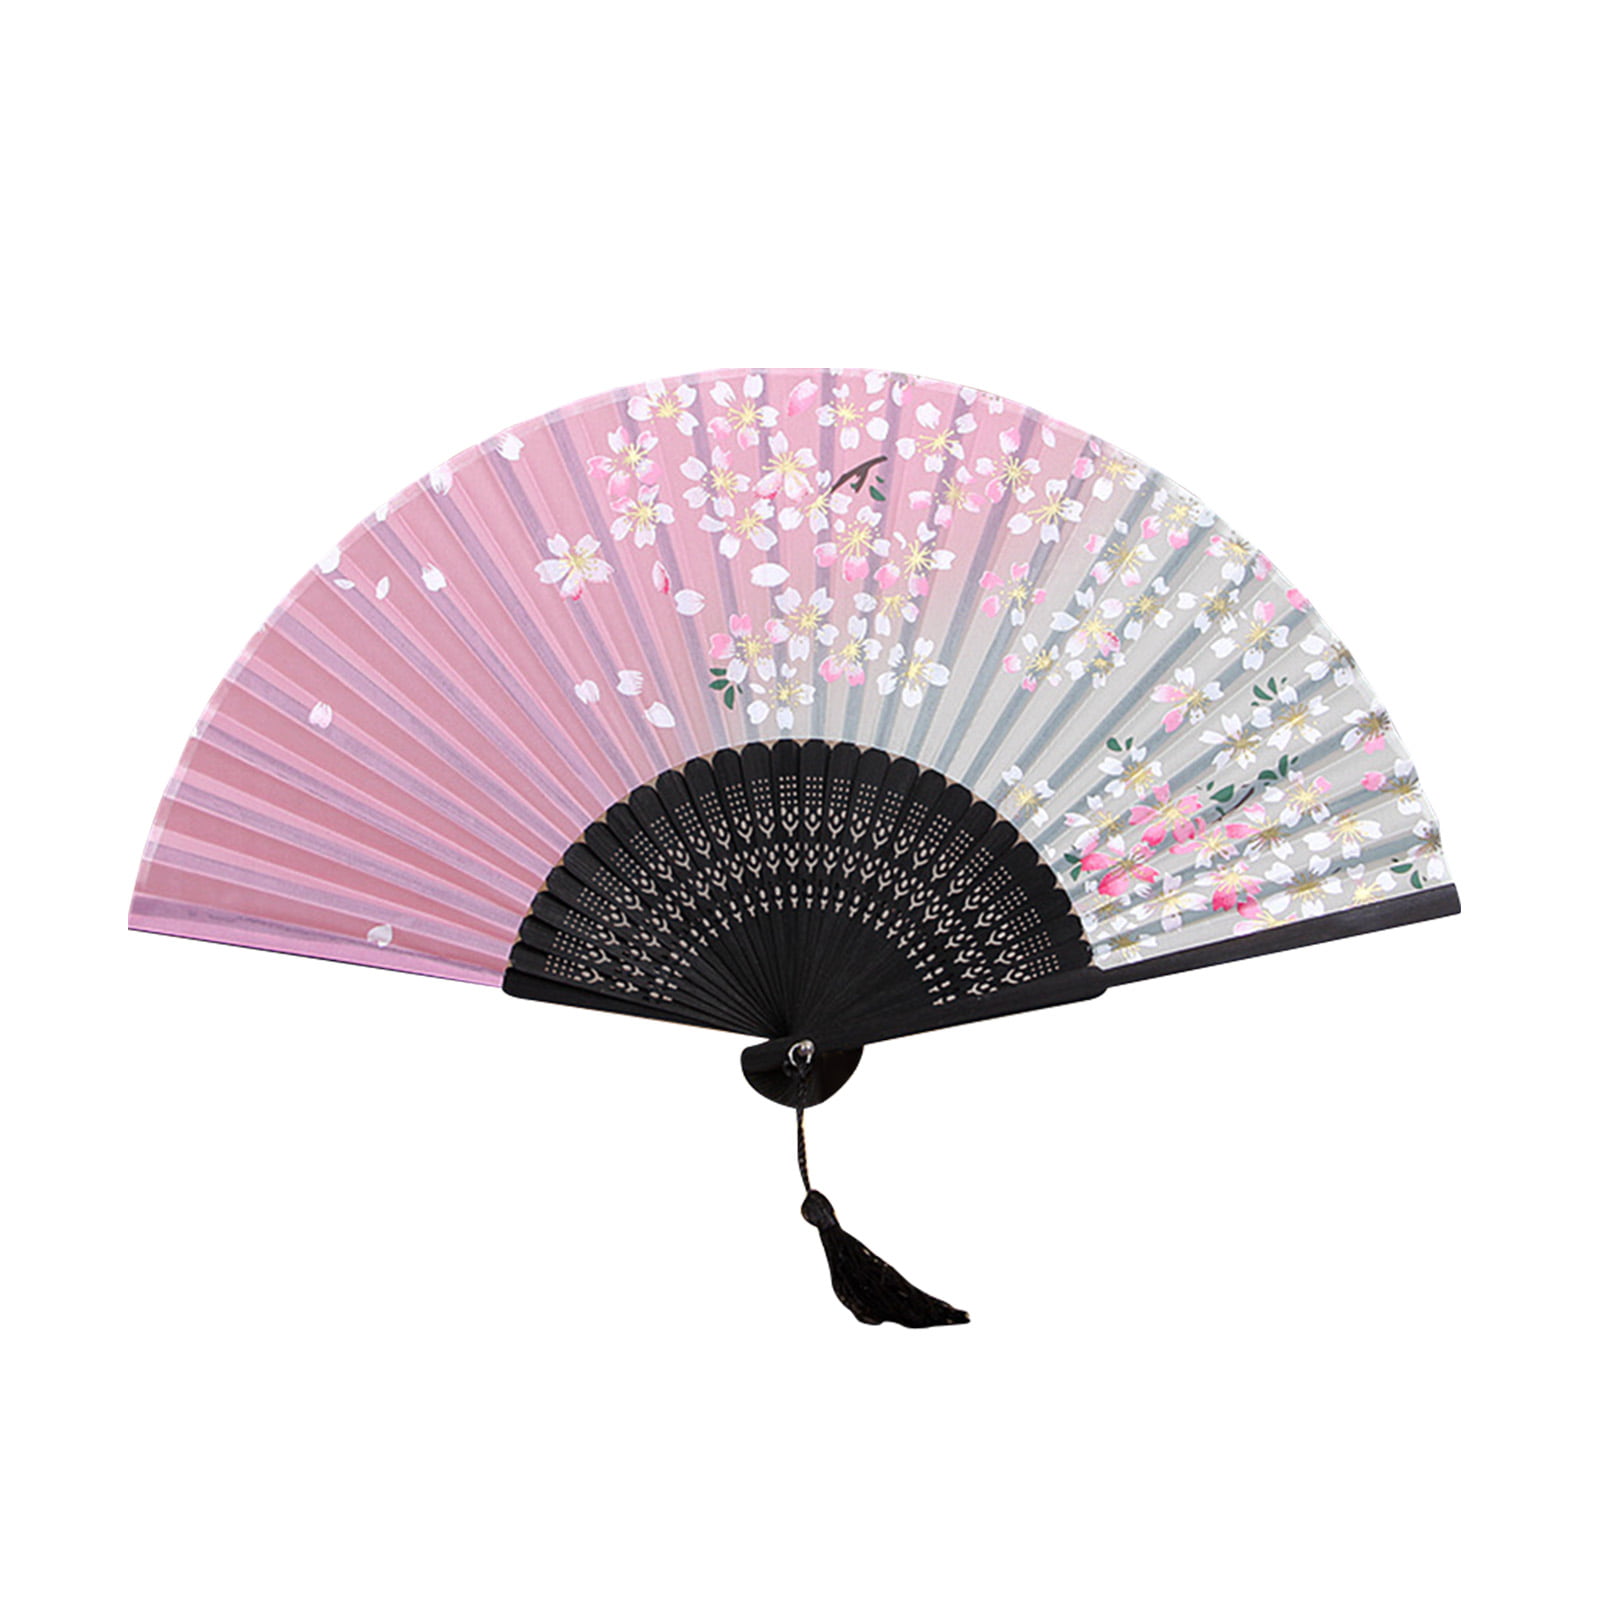 Chinese/Japanese/Retro Style Handheld Folding Fan with Fabric Bag for Gift